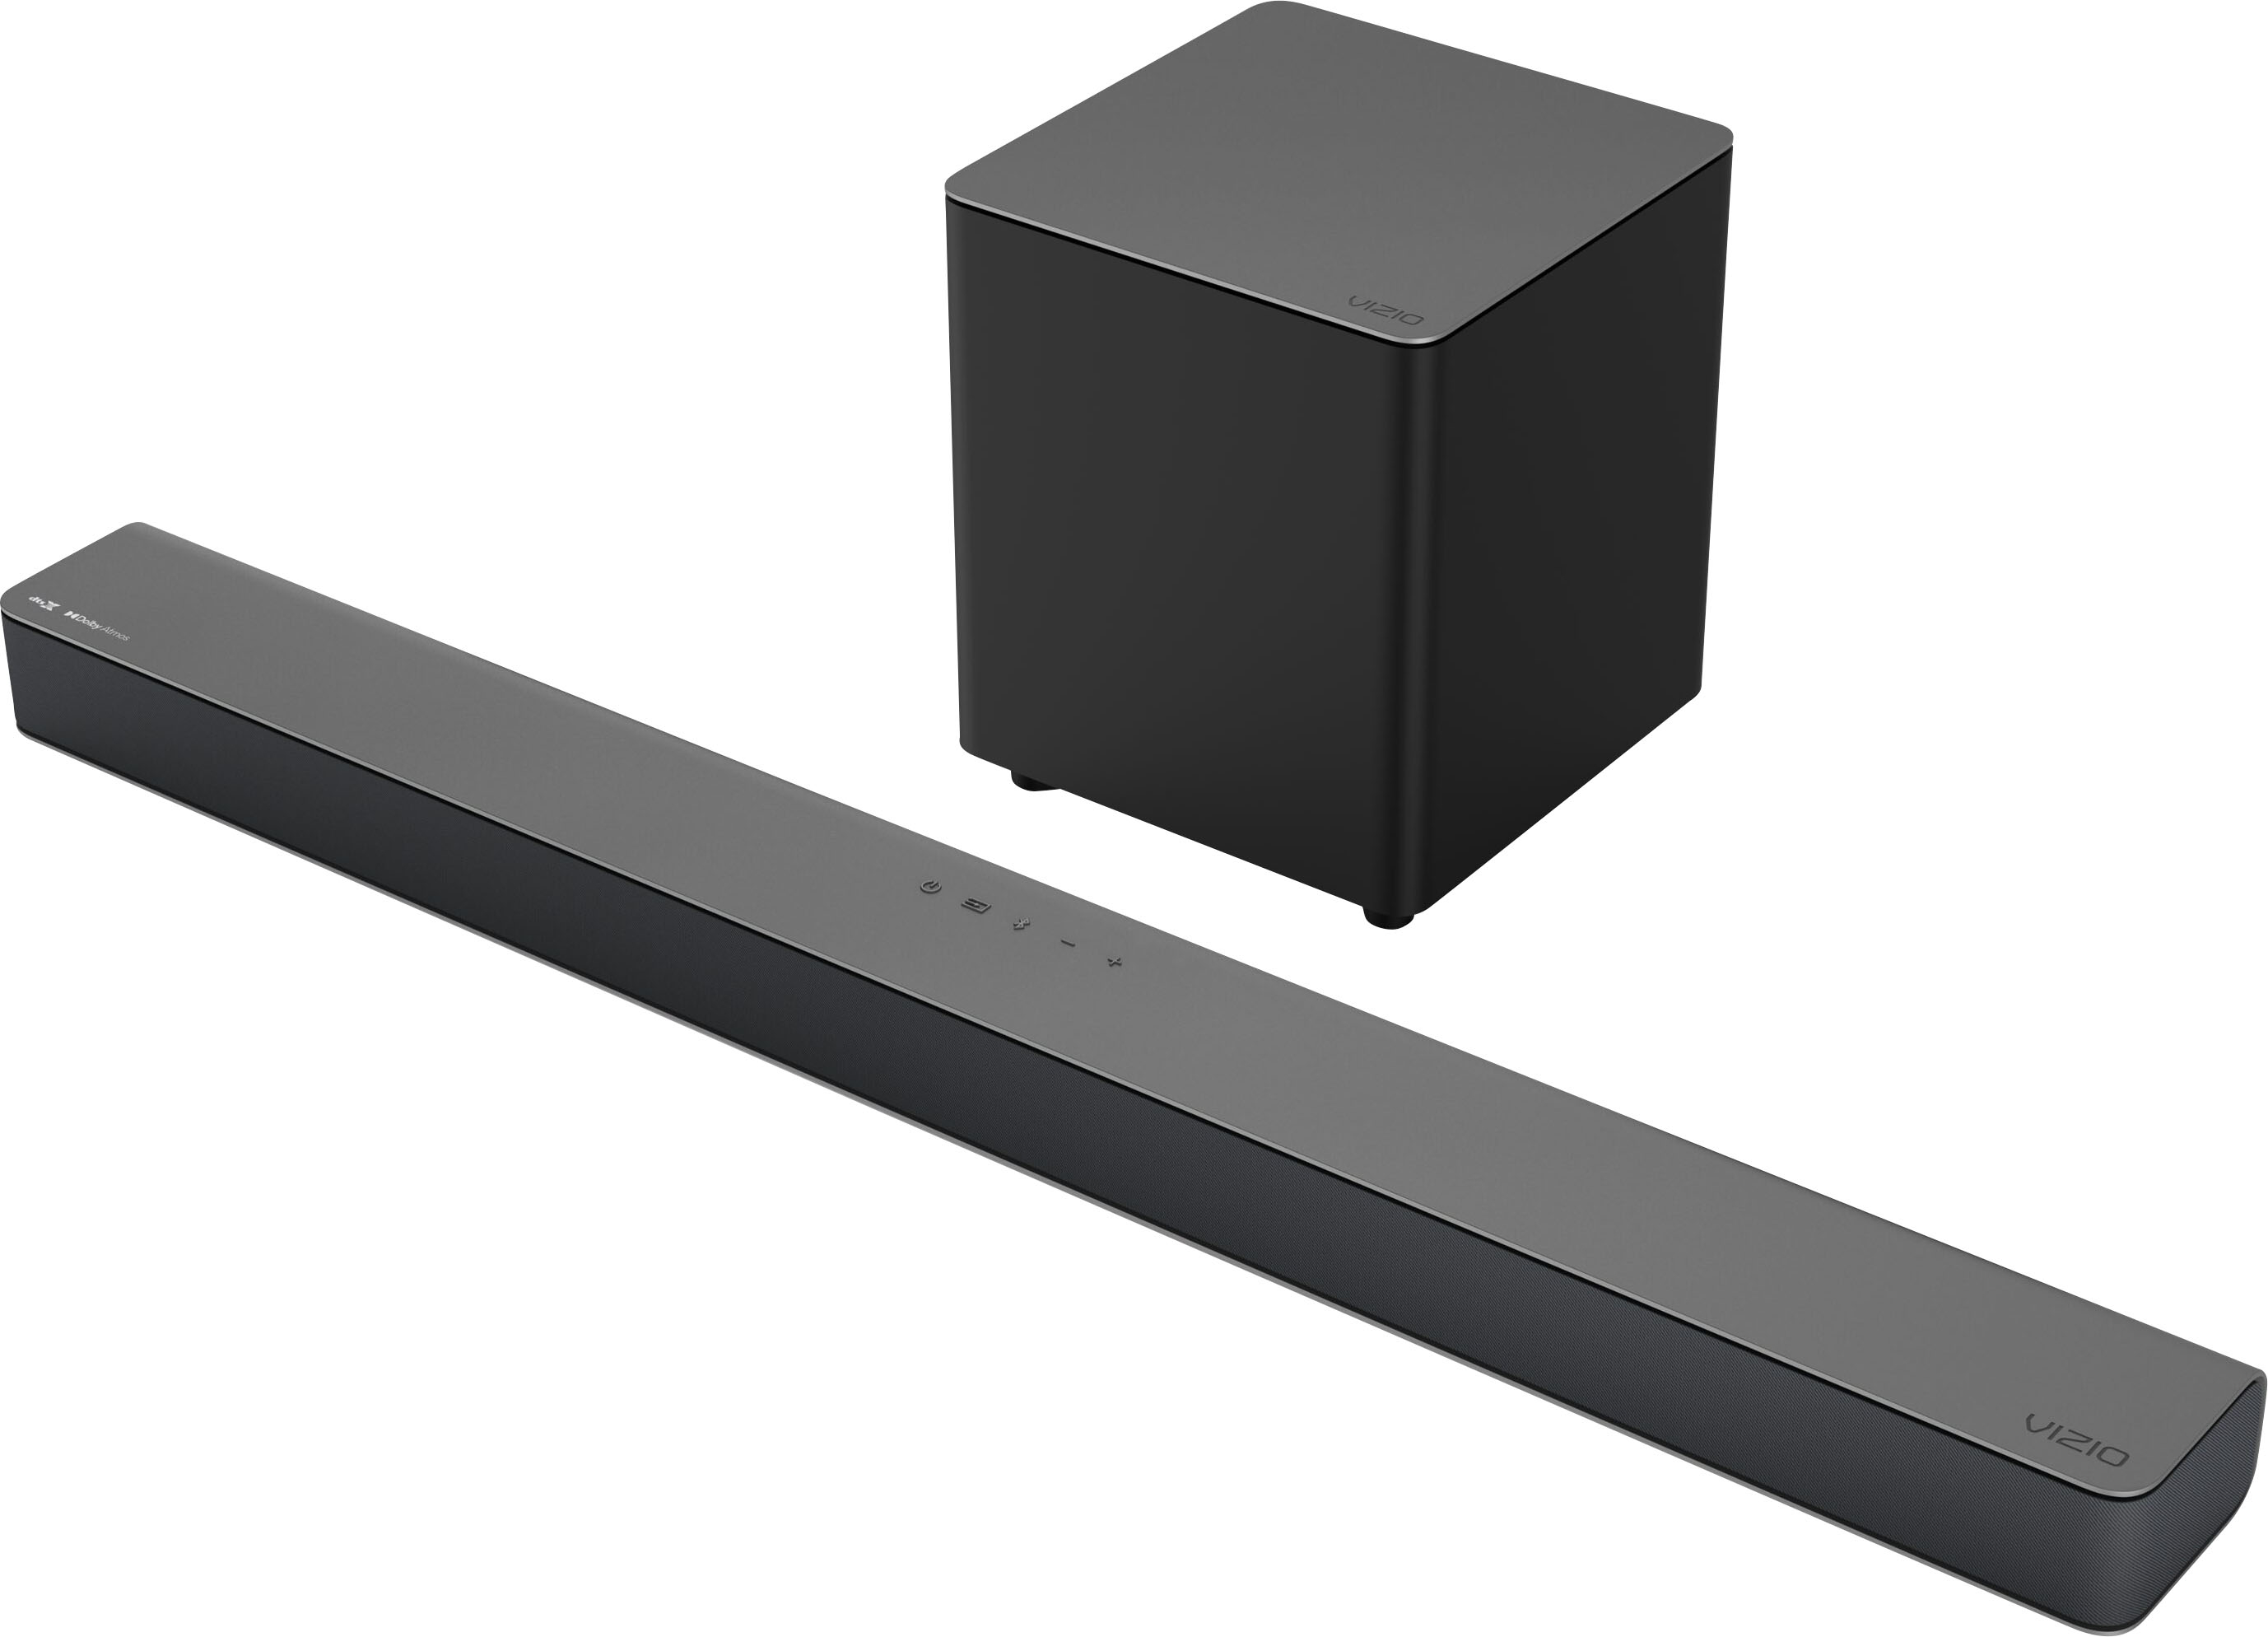 Angle View: VIZIO - 2.1 M-Series Premium Sound Bar with Wireless Subwoofer, Dolby Atmos and DTS:X - Black